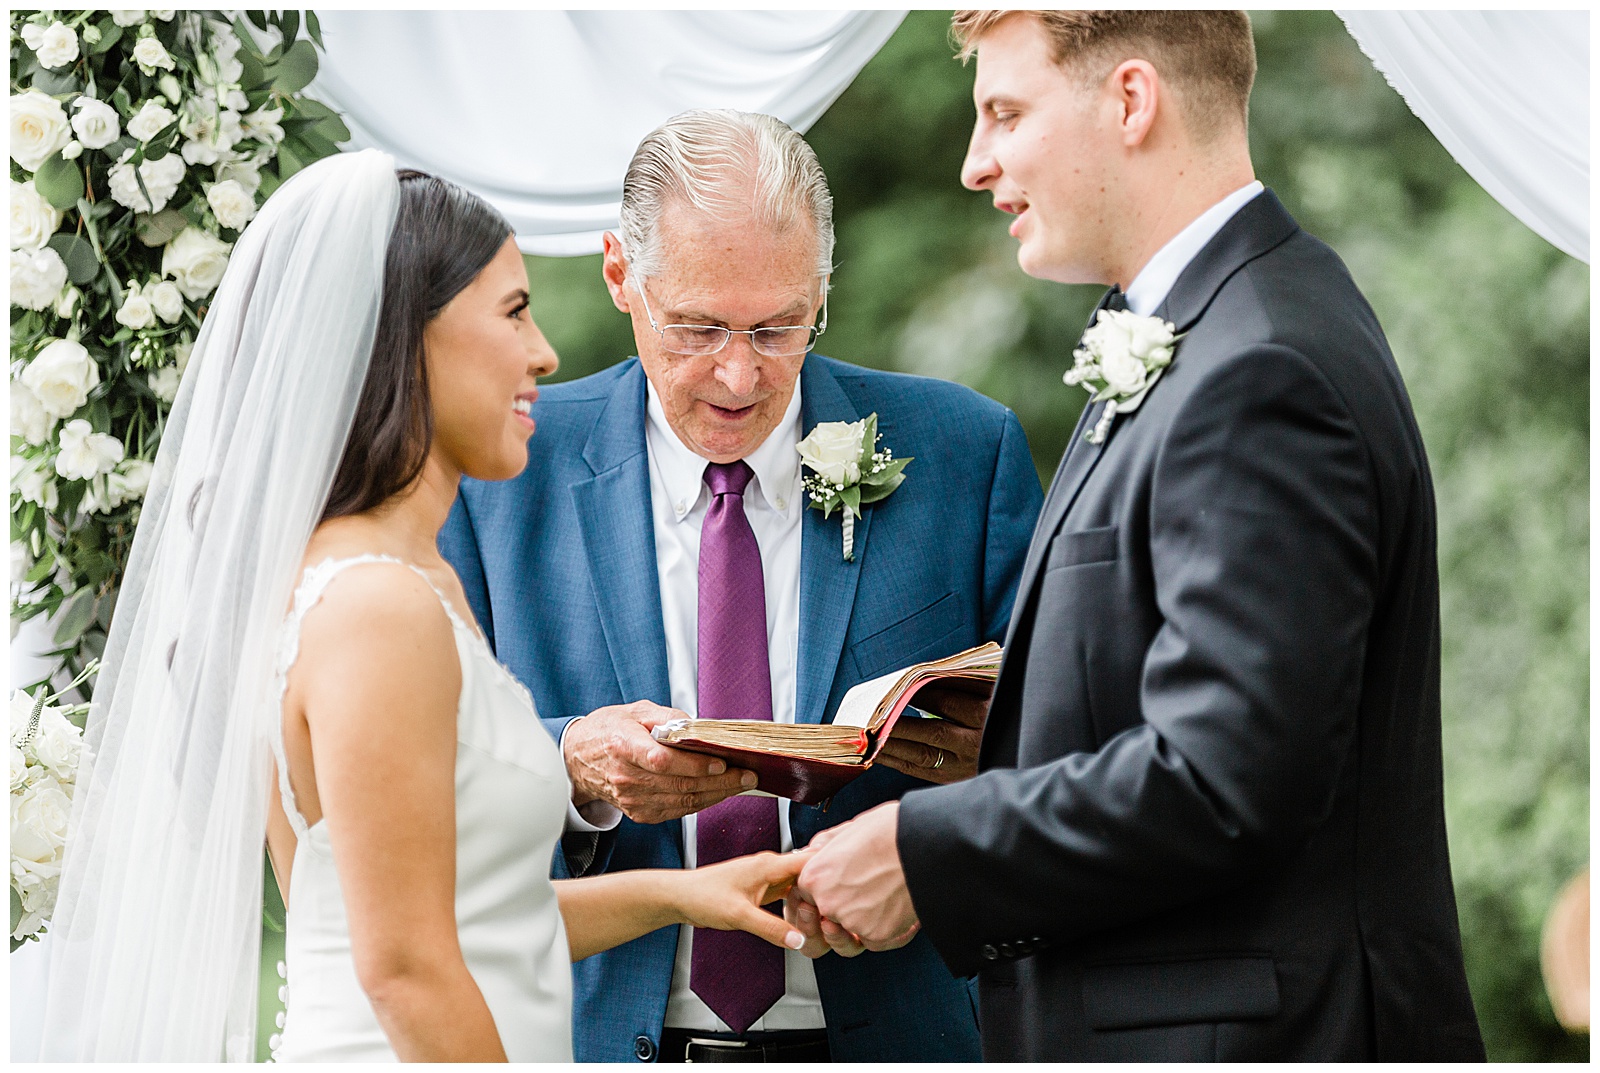 bride-and-groom-exchanging-vows-roger-sherman-inn-kristina-staal-photography.jpg